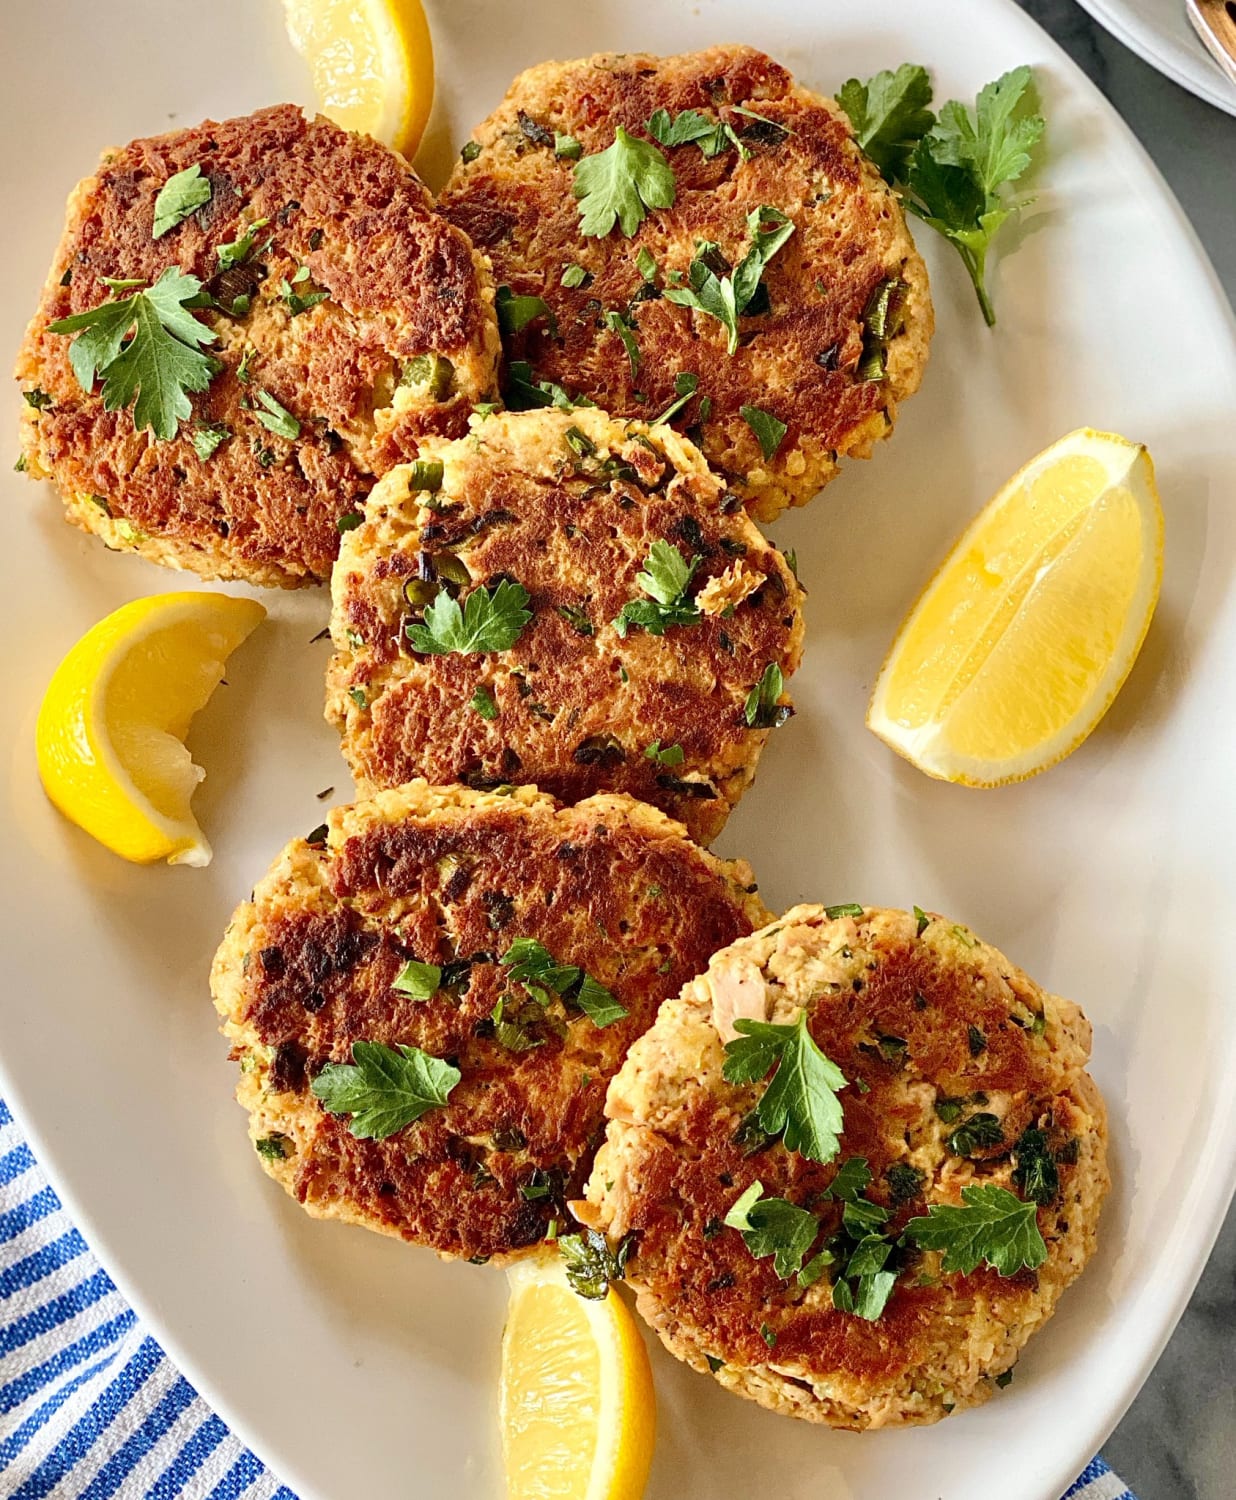 Tuna patties are a fun way to turn a few cans of tuna into an easy, super-satisfying meal. And thanks to a mix of lemon, scallions, and herbs, along with the crisp, golden-brown crust, they even feel a little fancy: